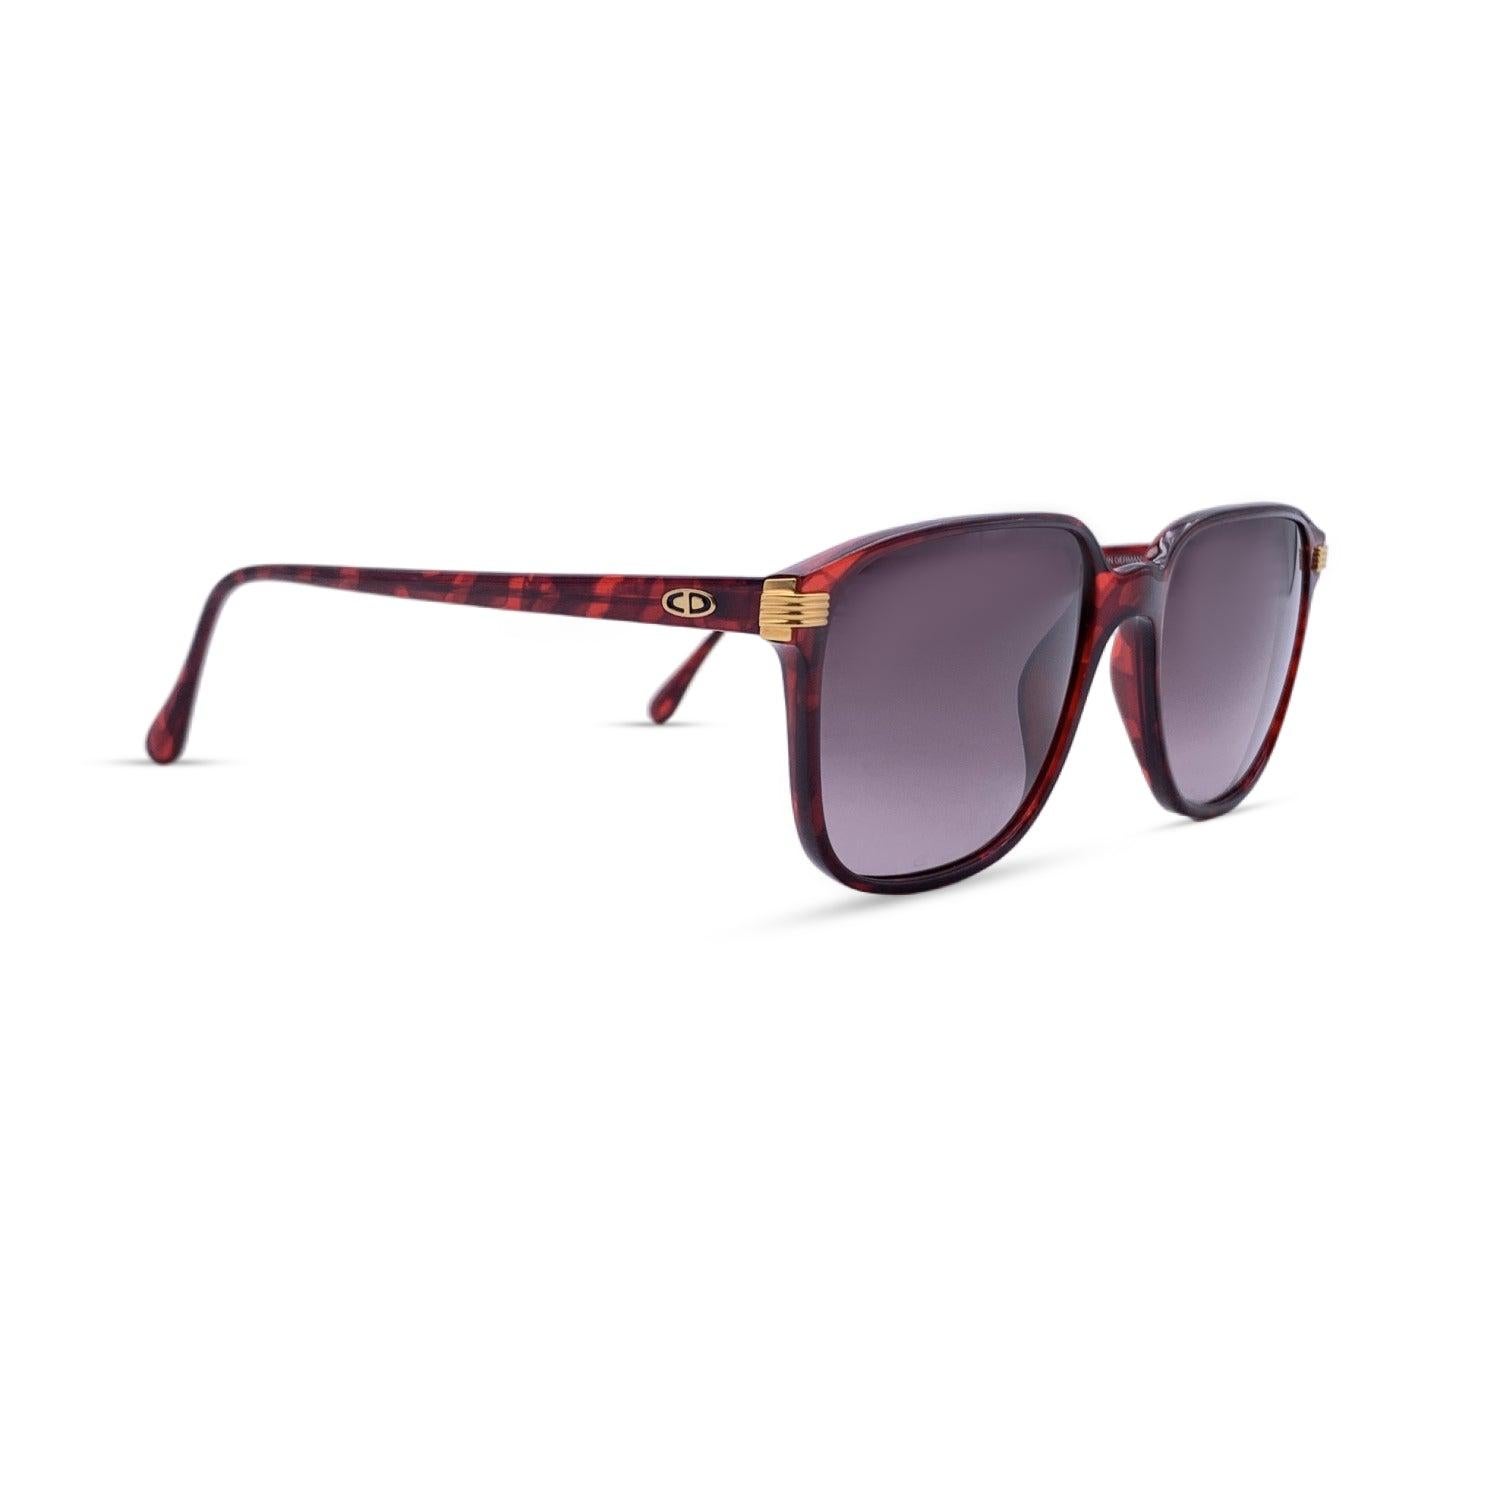 Christian Dior Vintage Burgundy Sunglasses 2542 30 Optyl 54/17 135mm In Excellent Condition For Sale In Rome, Rome